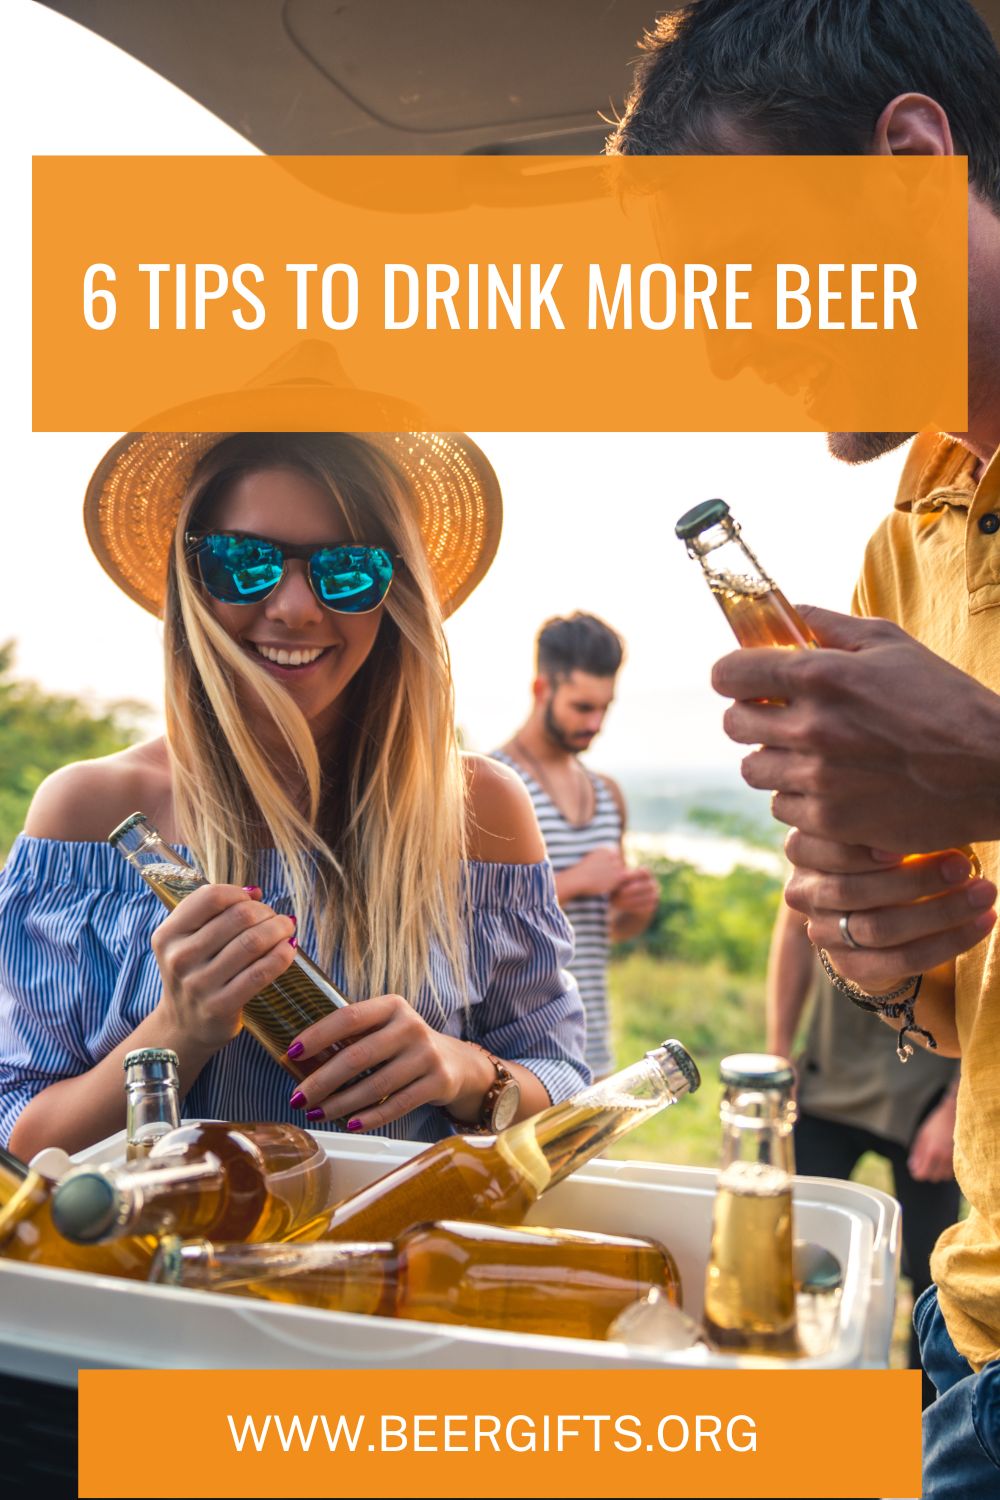 6 Tips to Drink More Beer7